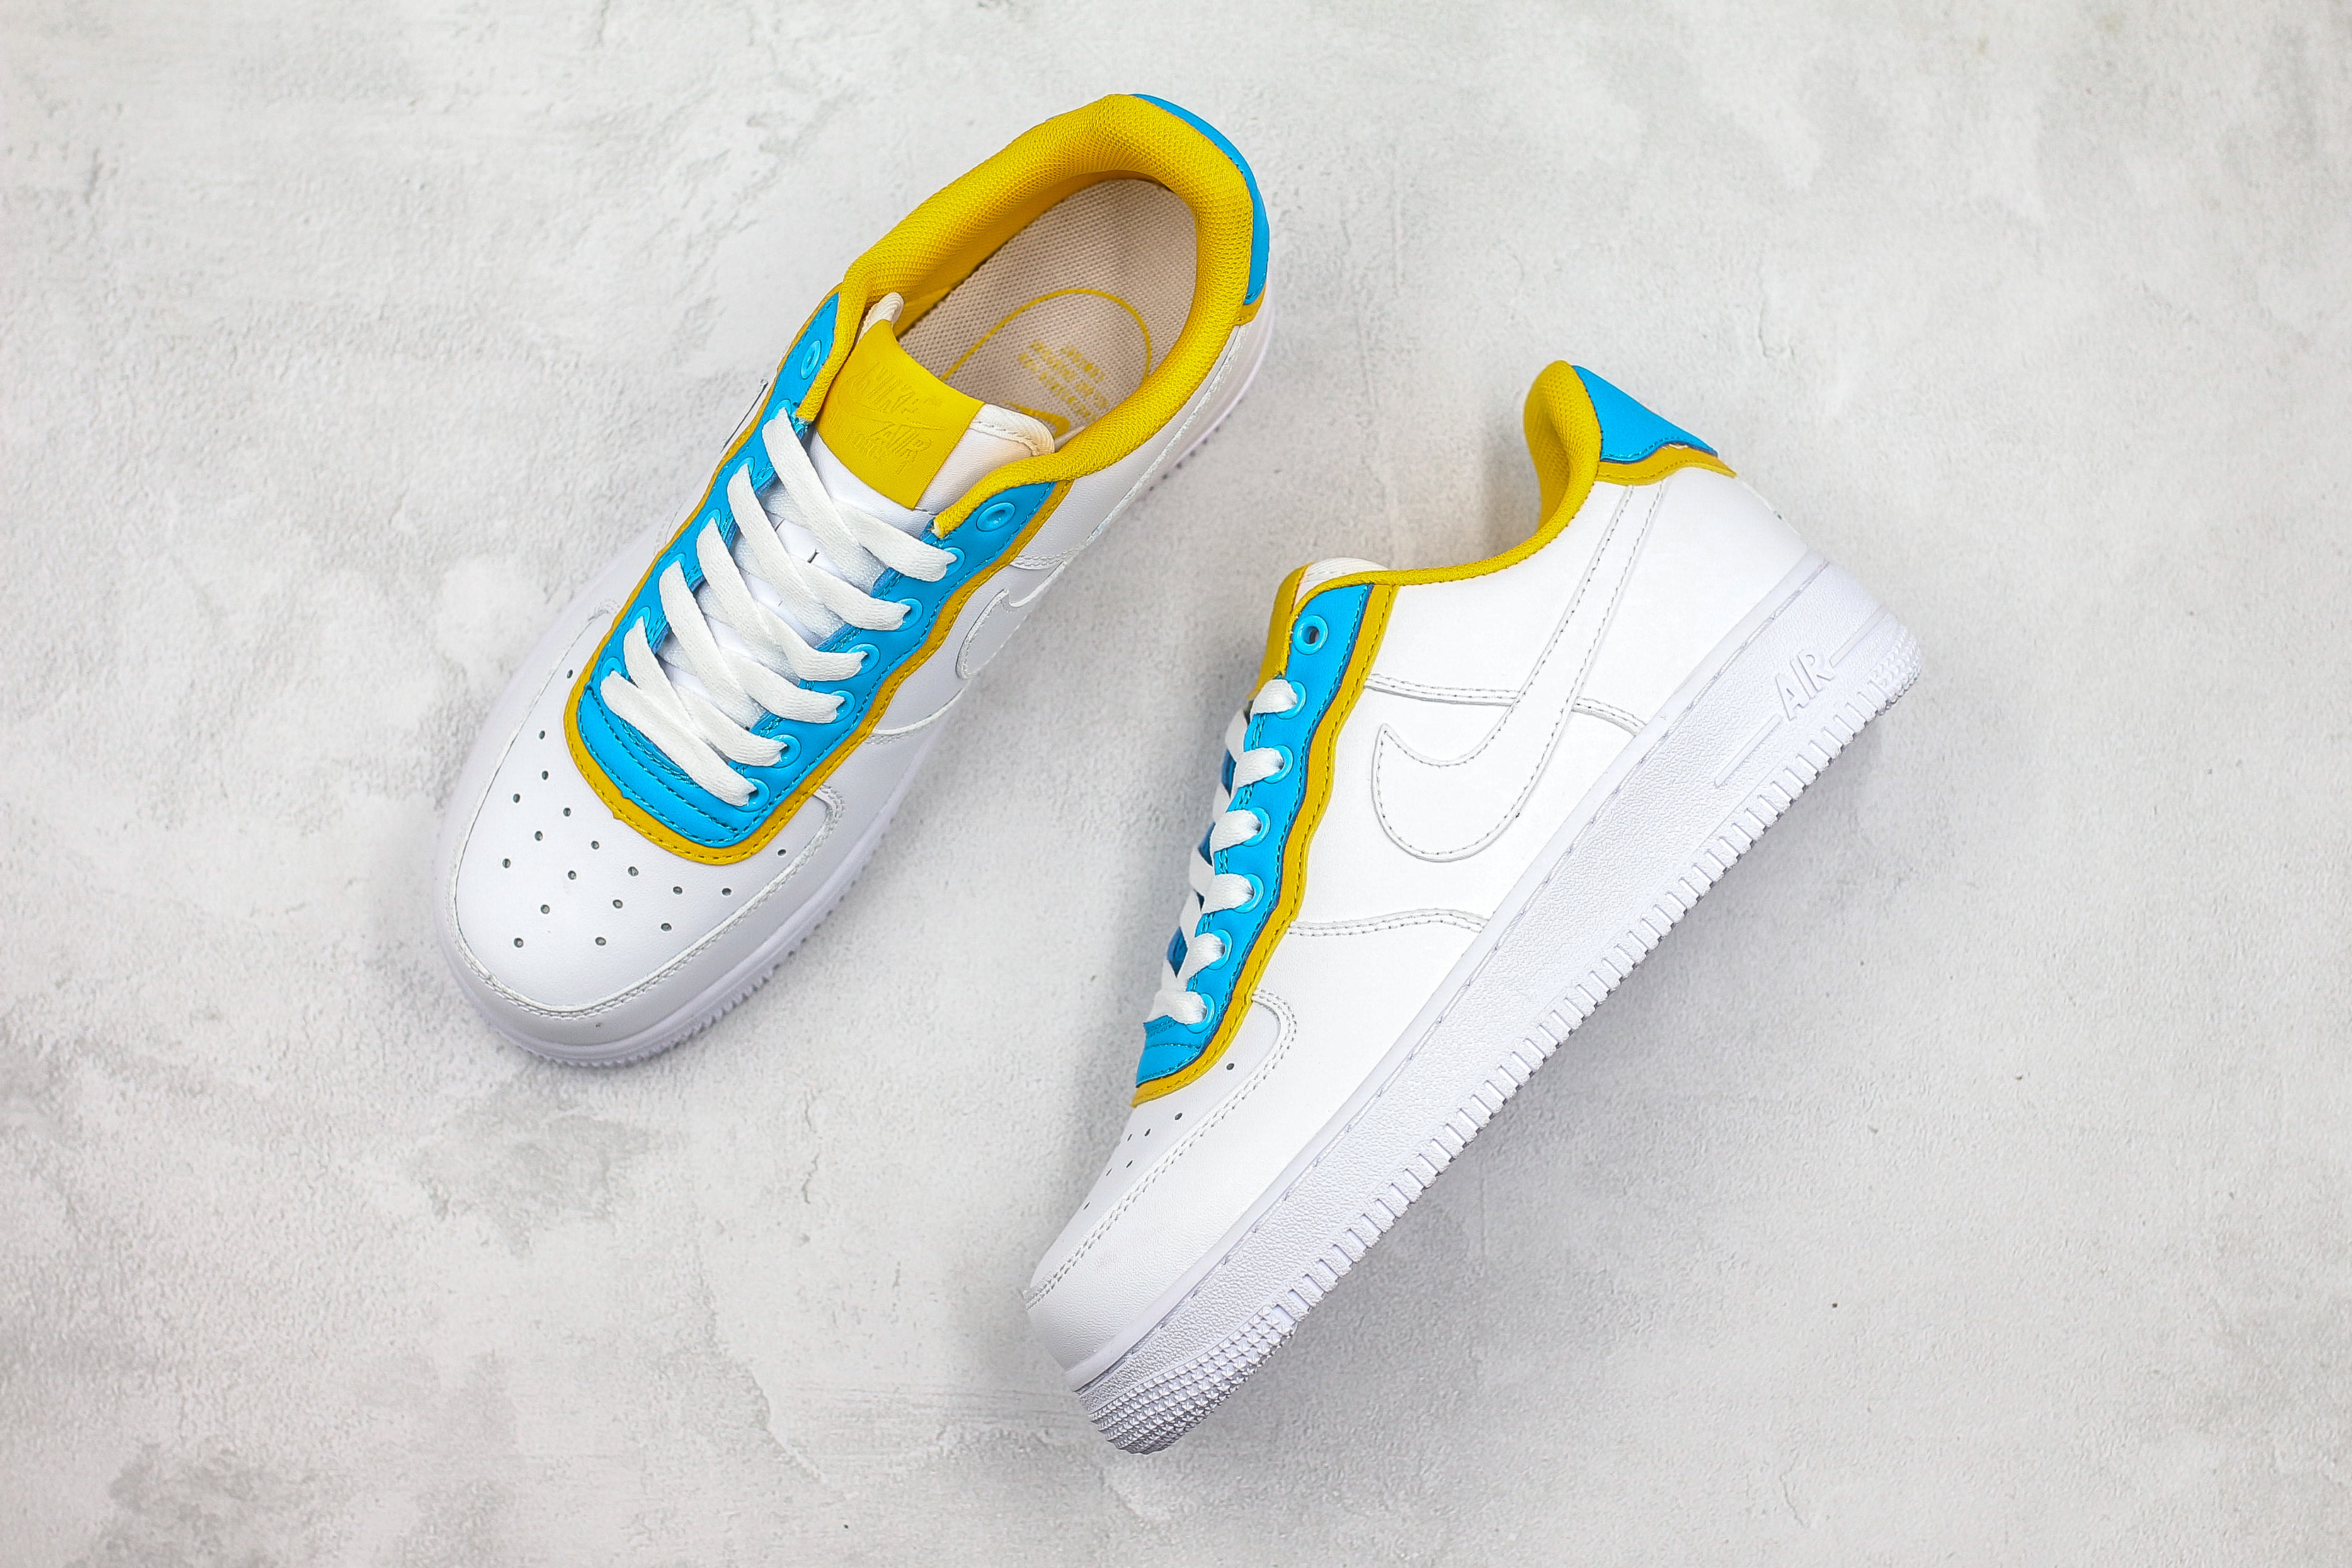 air force 1 blue yellow